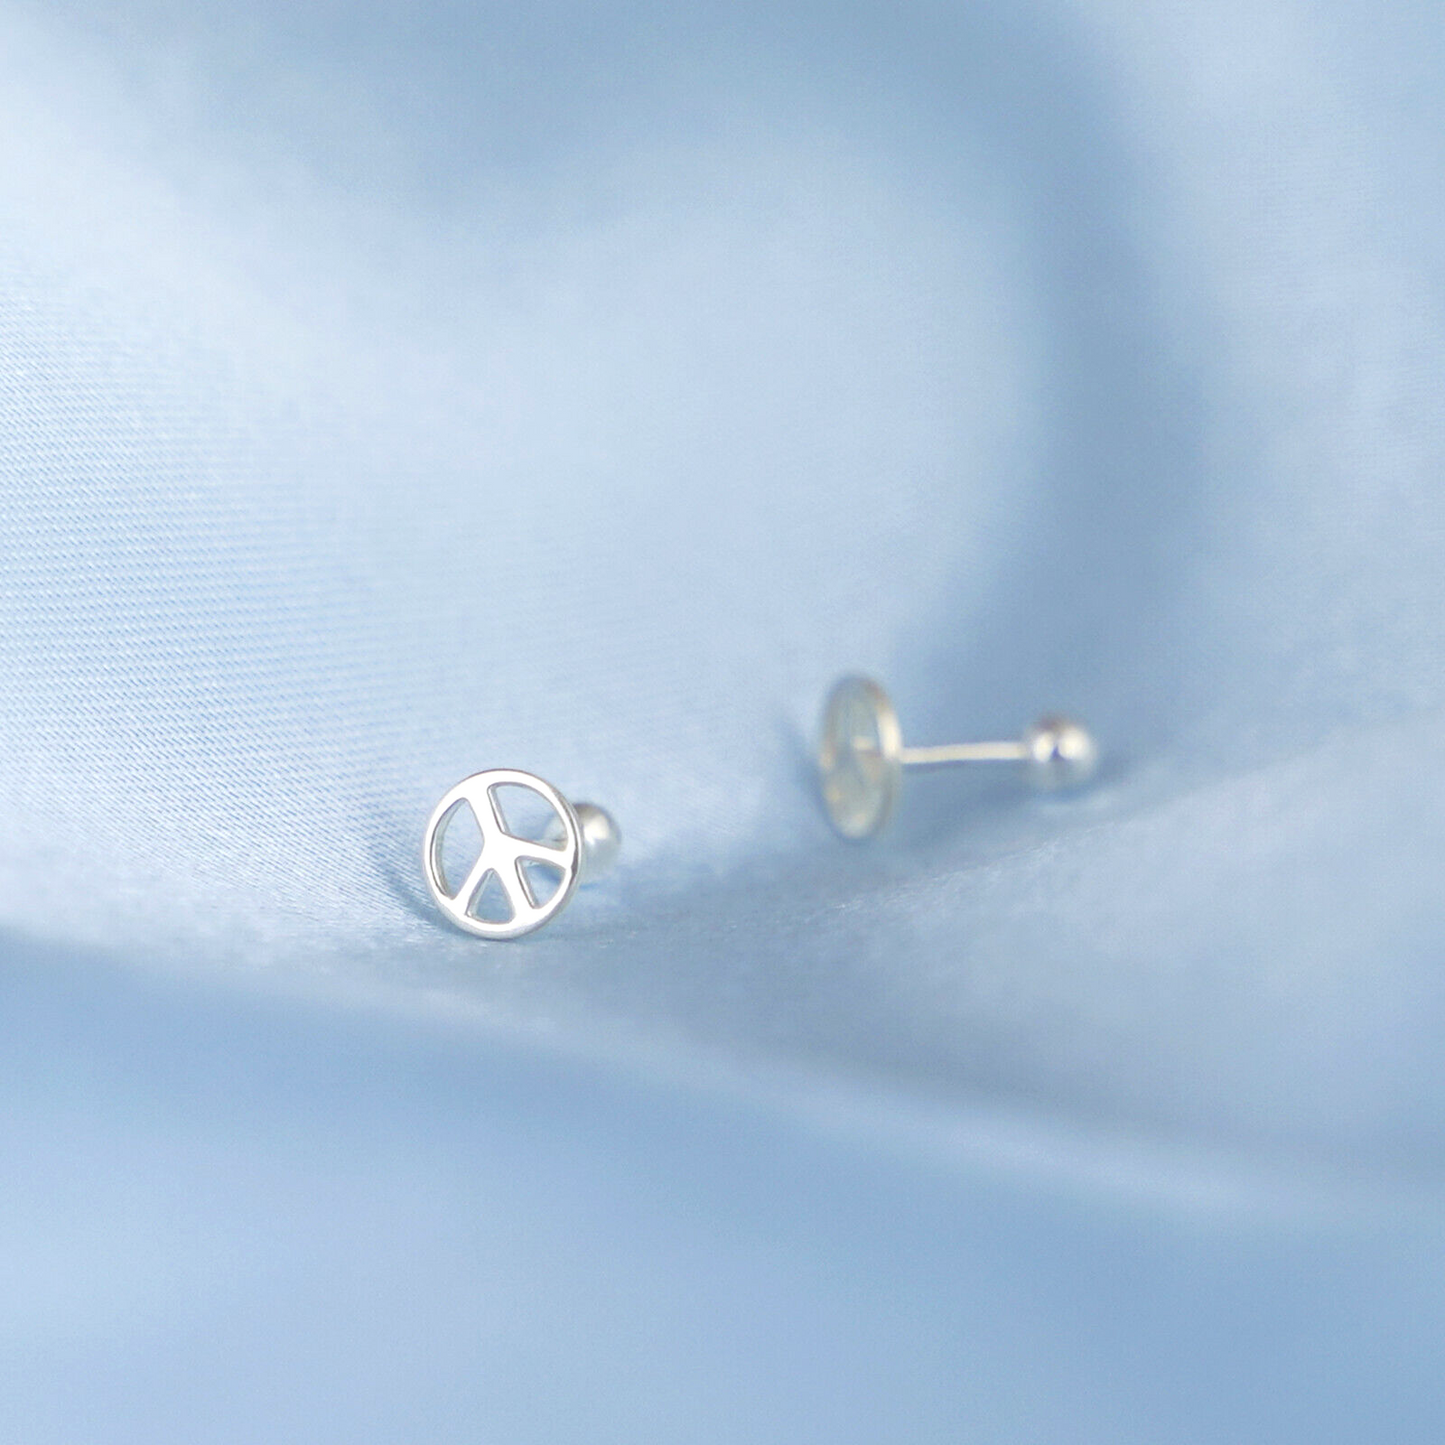 999 Silver Peace Sign Earrings | CND Symbol Barbell Beads on Screw Back Posts - sugarkittenlondon